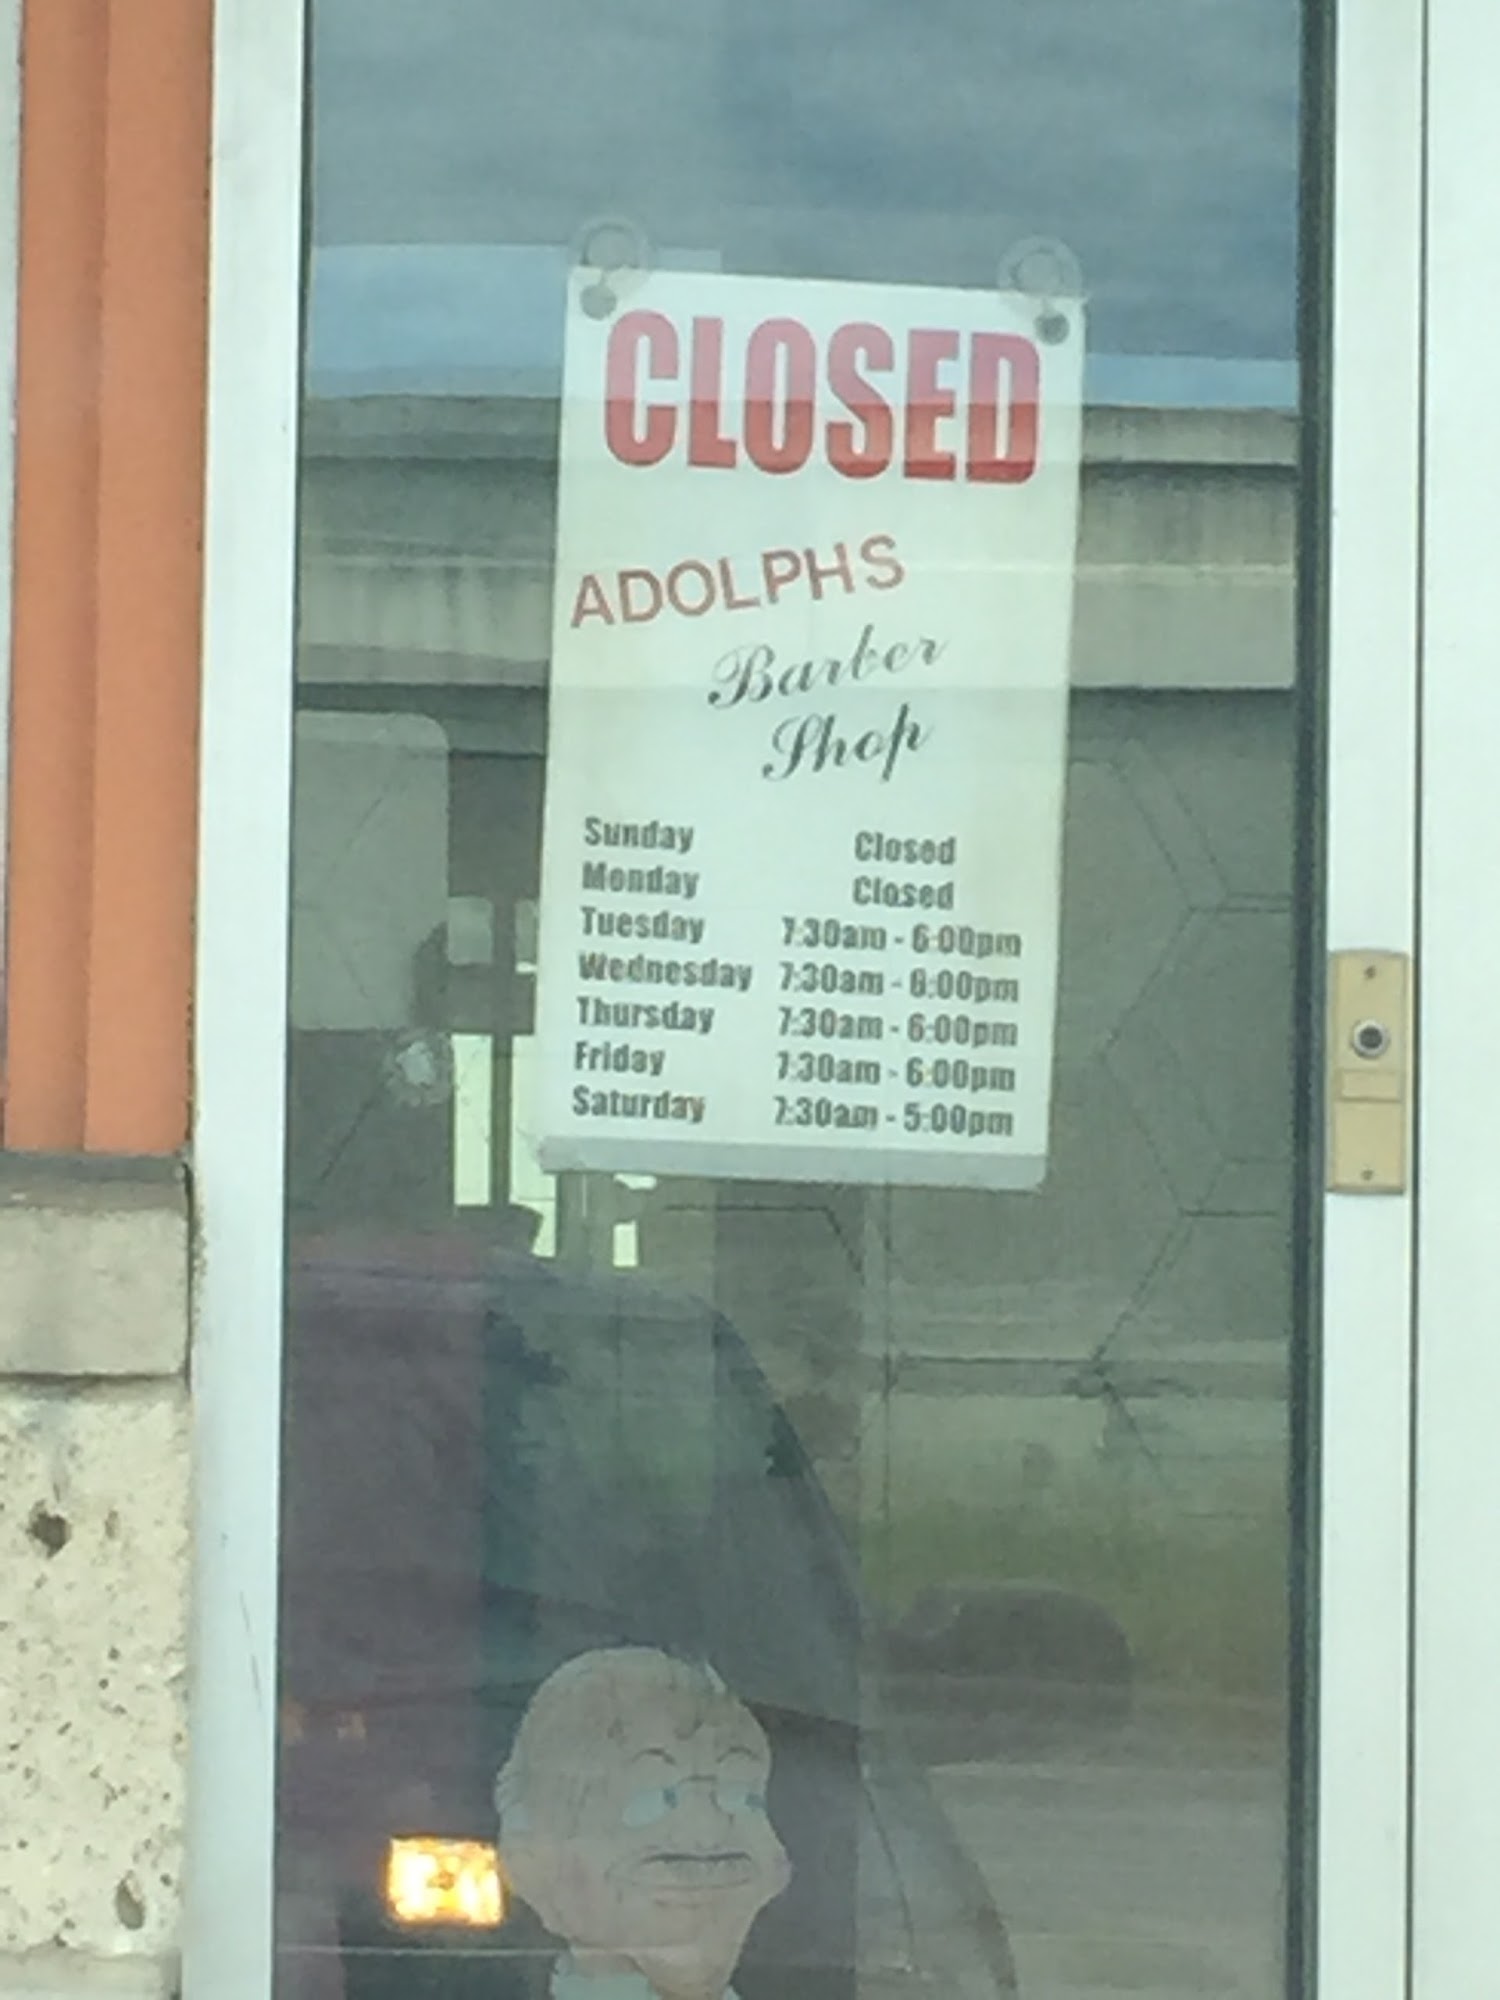 Adolph's Barber Shop